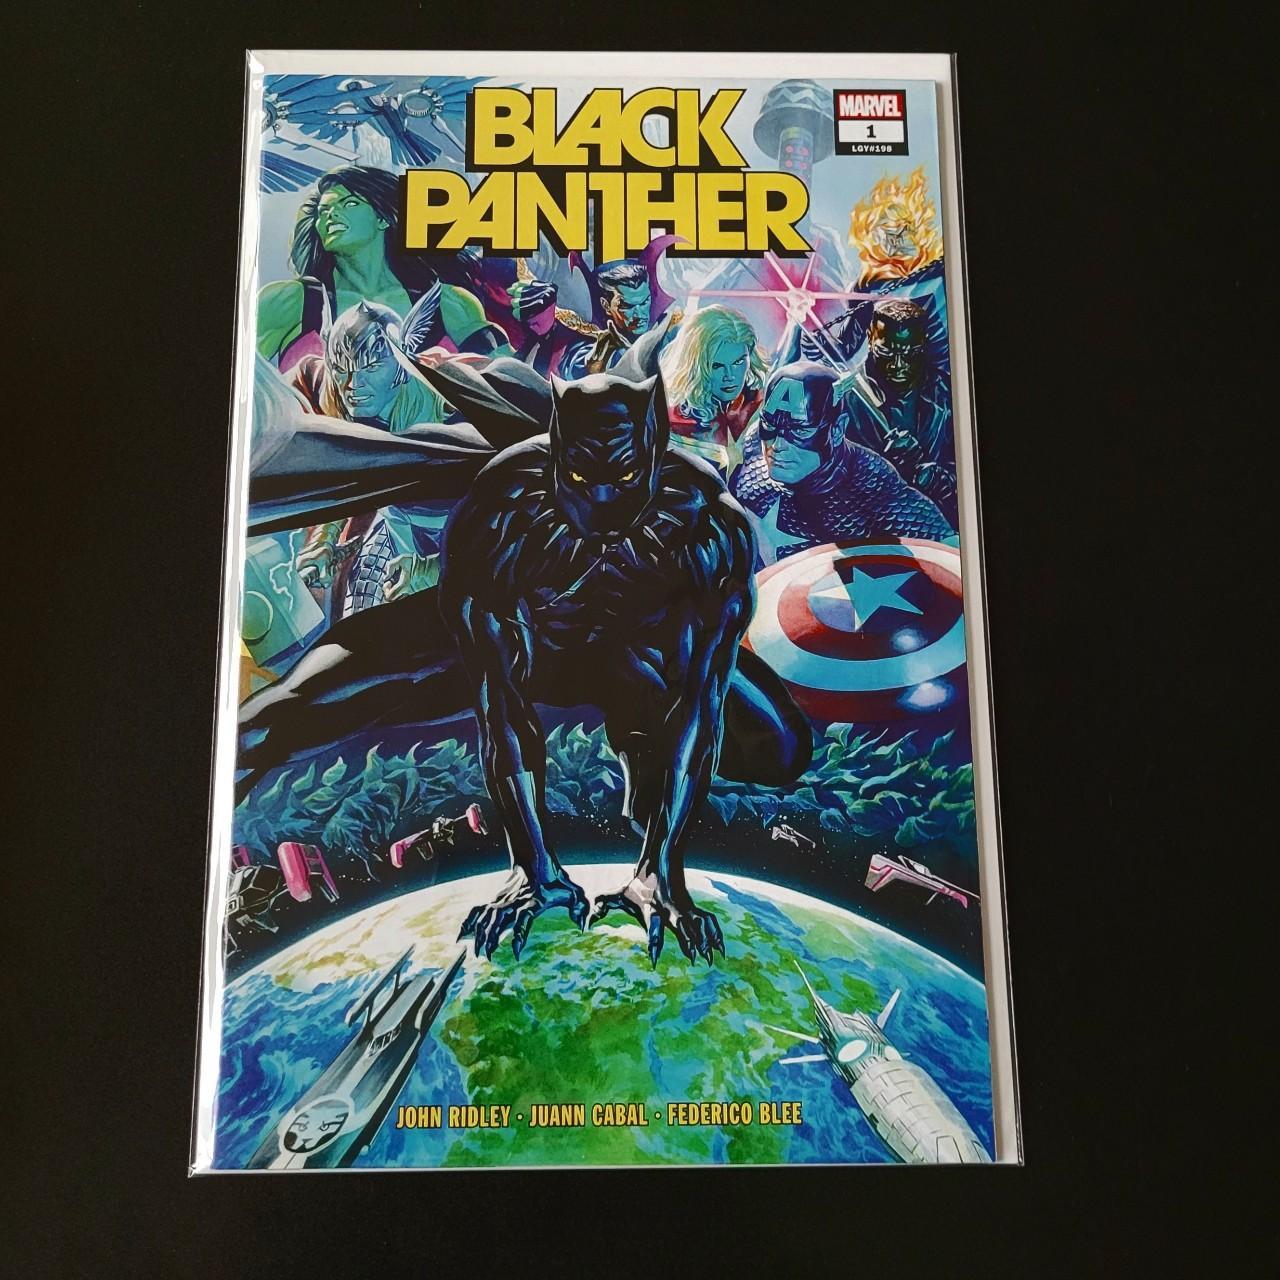 Black Panther #1 Alex Ross Cover Art If You Are - Depop